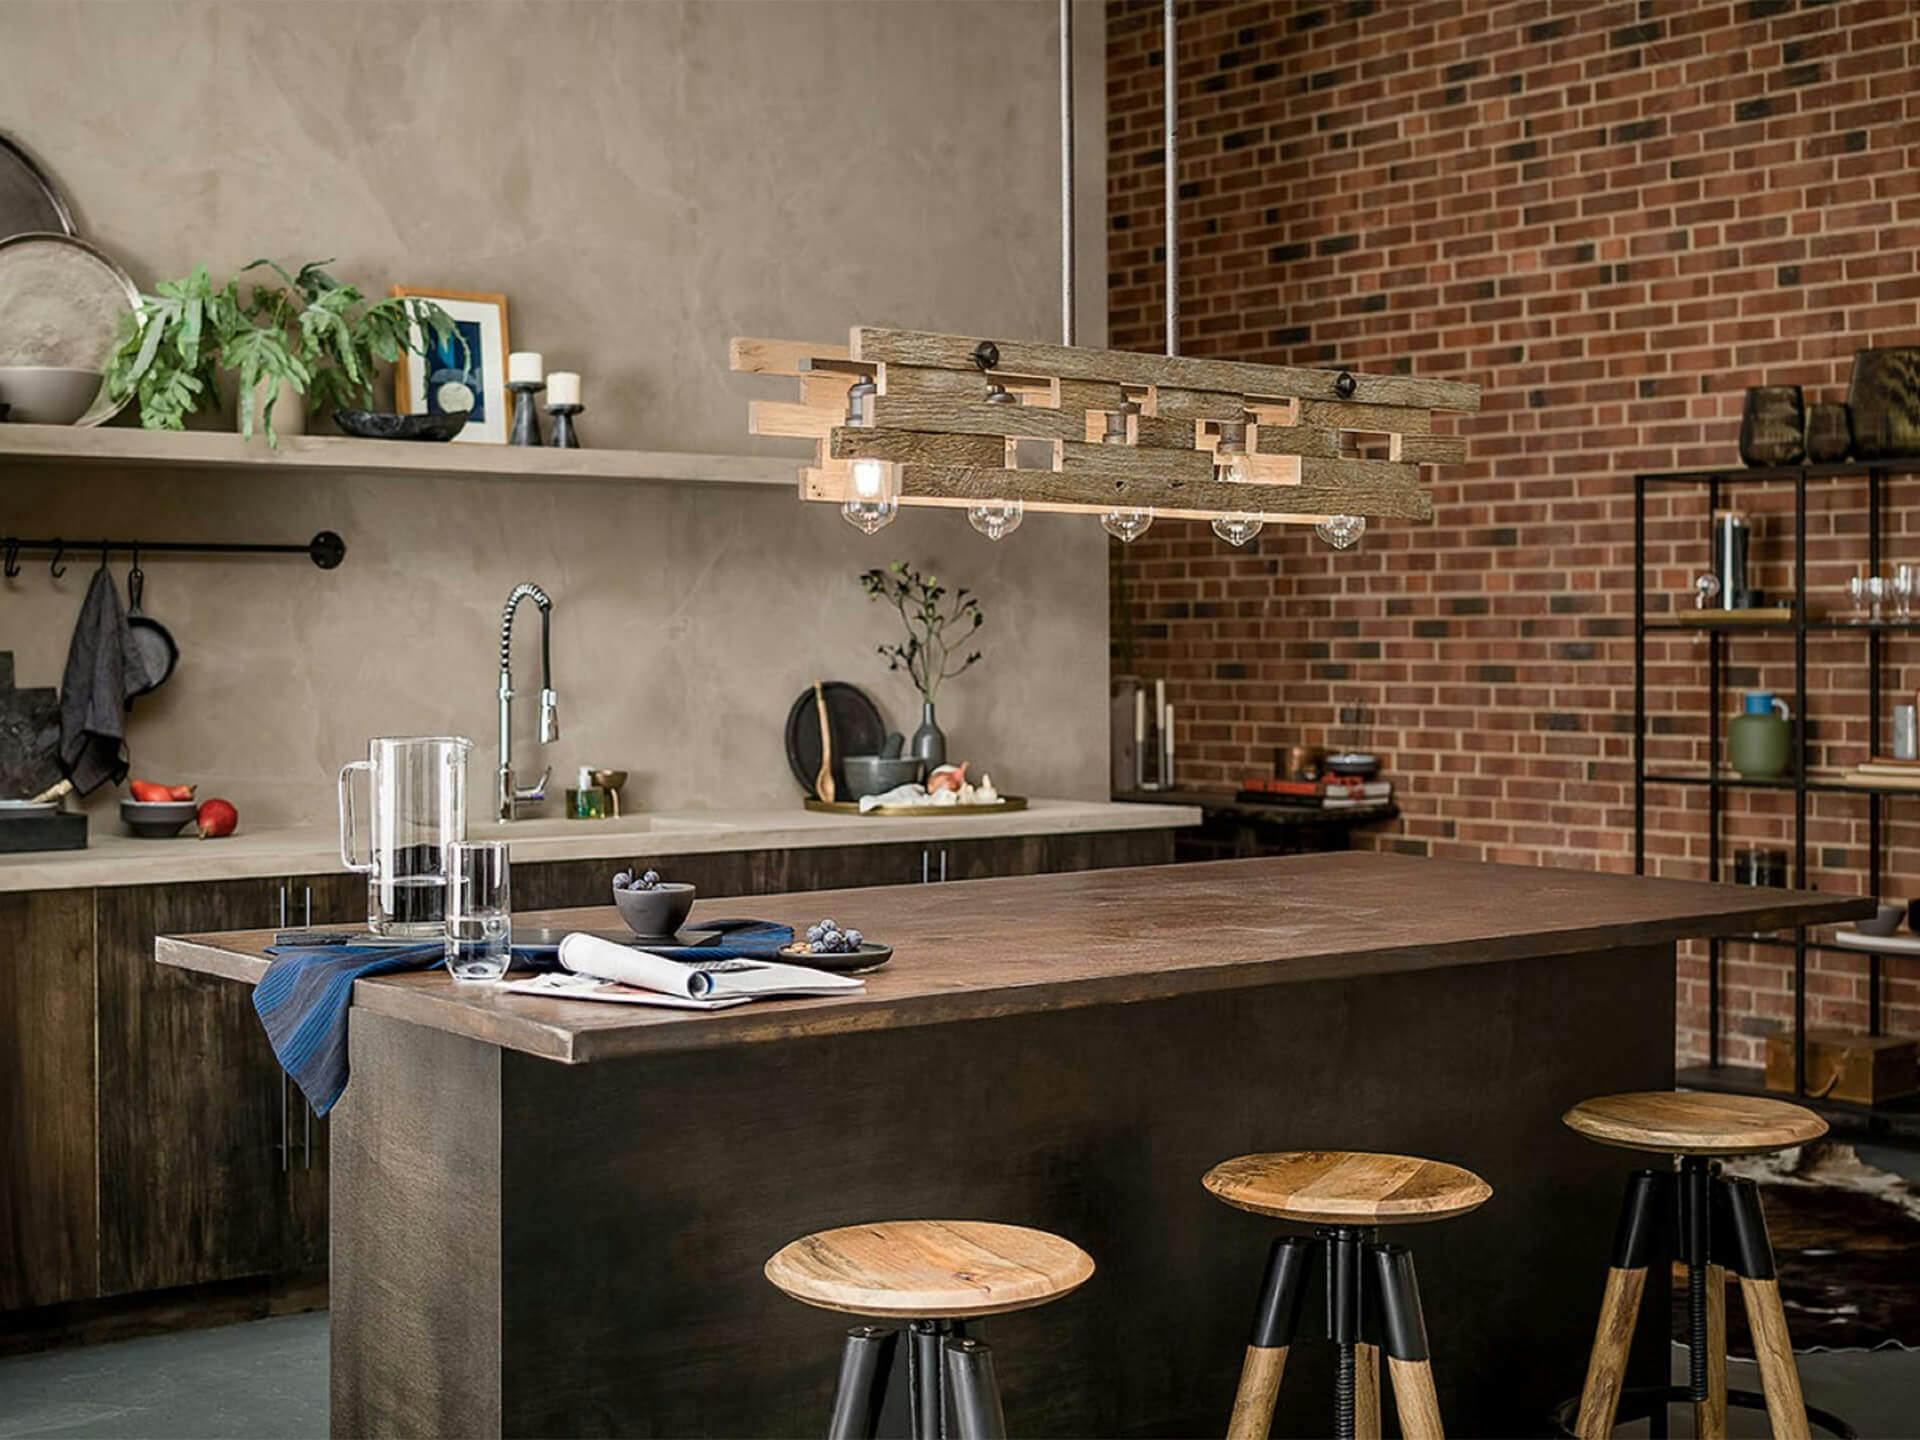 Industrial kitchen with brick wall, metal shelves, long kitchen island and featuring a Cuyahoga Mill chandelier in a light wood